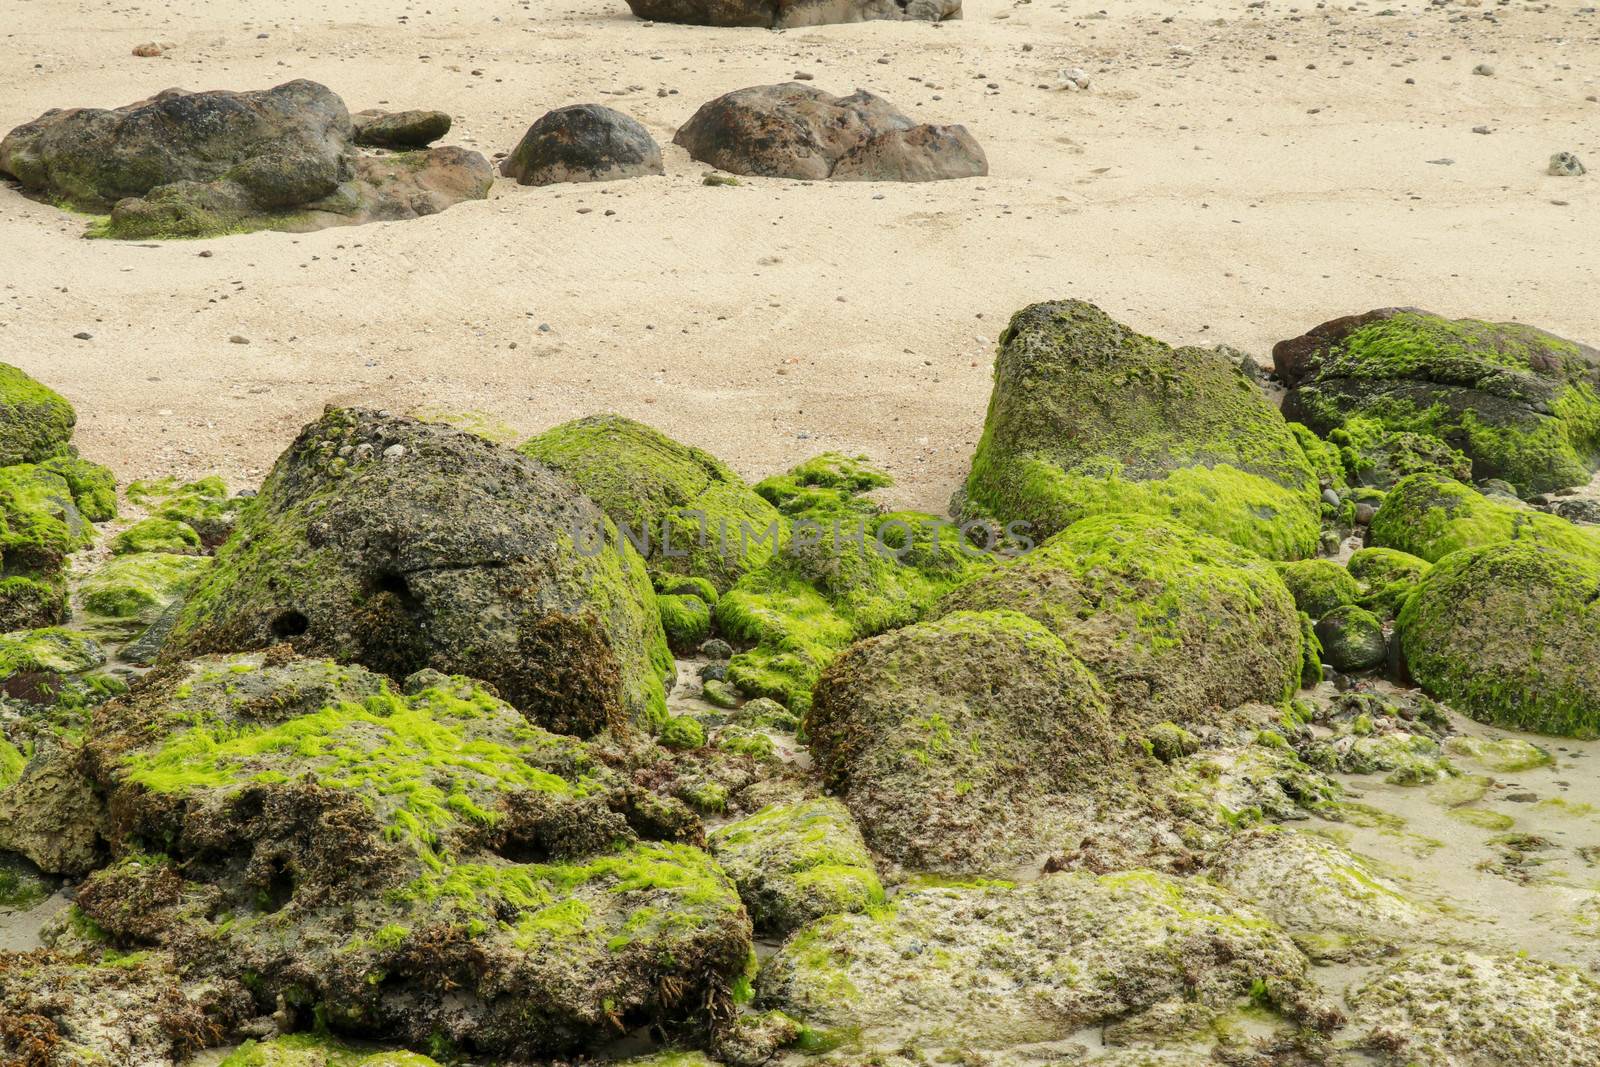 A beautiful view across a natural beach setting during low tide with exposure of algae and sand surrounded by large stones.